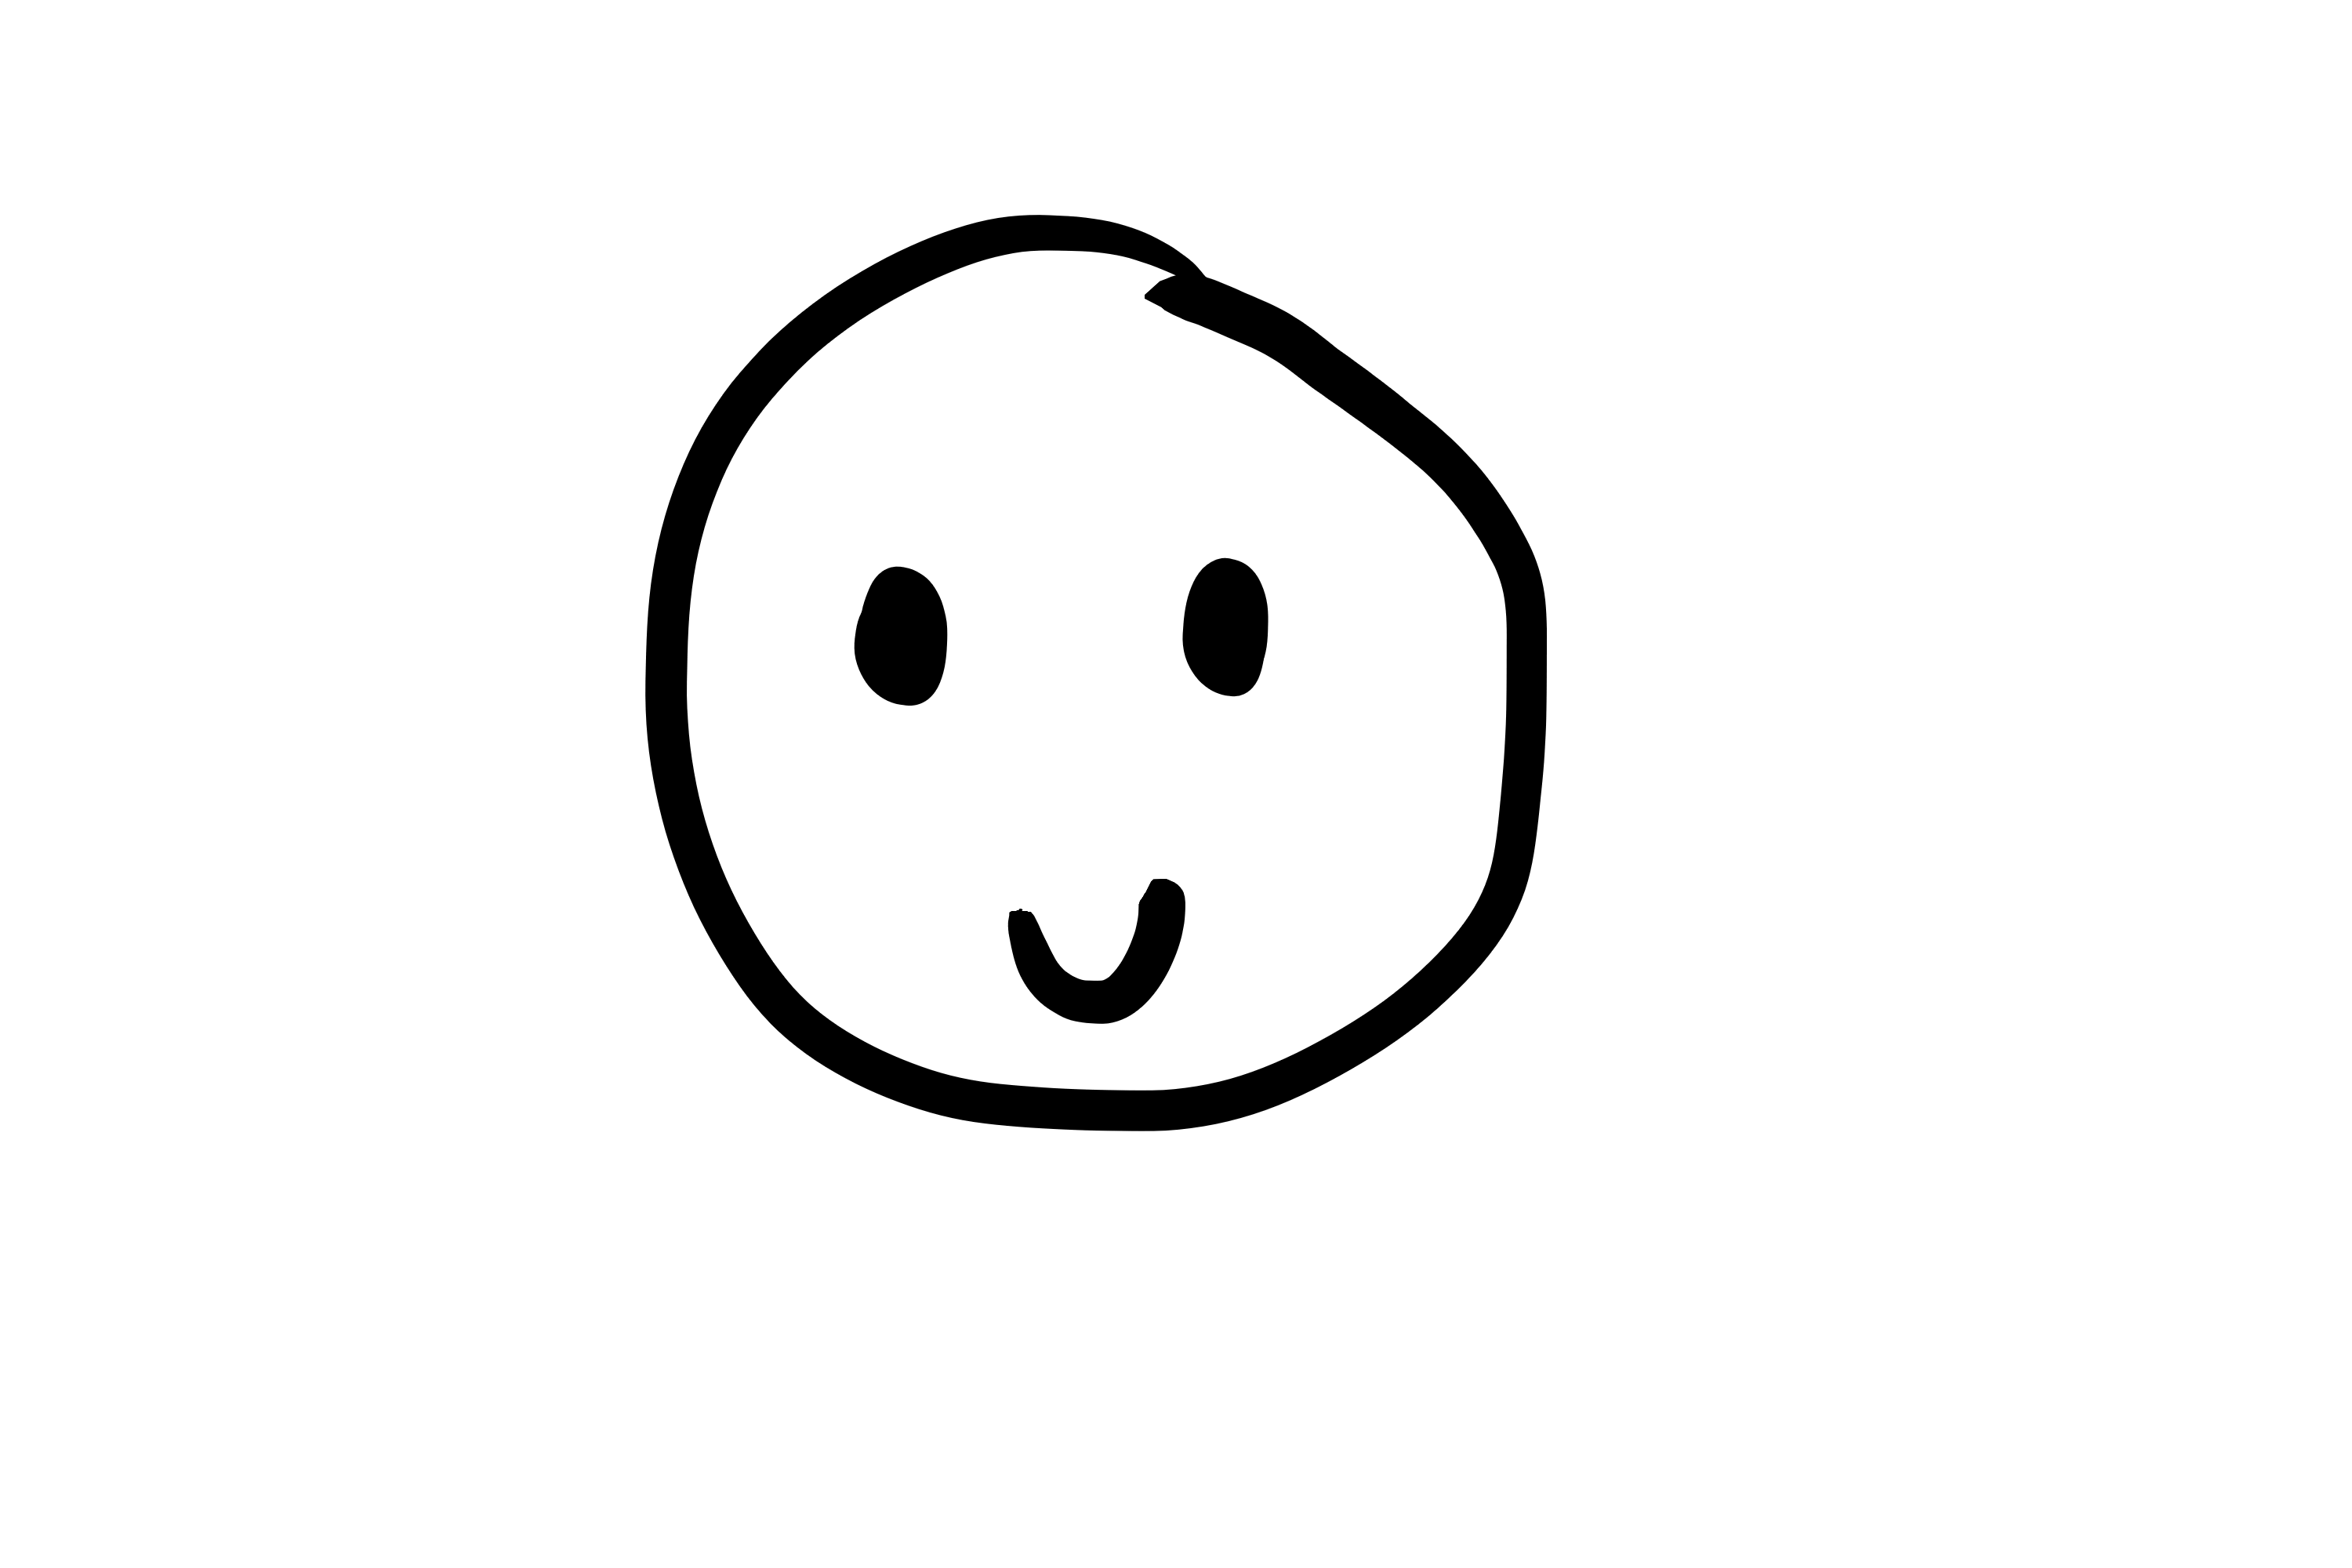 Smiling Face Drawing - ClipArt Best